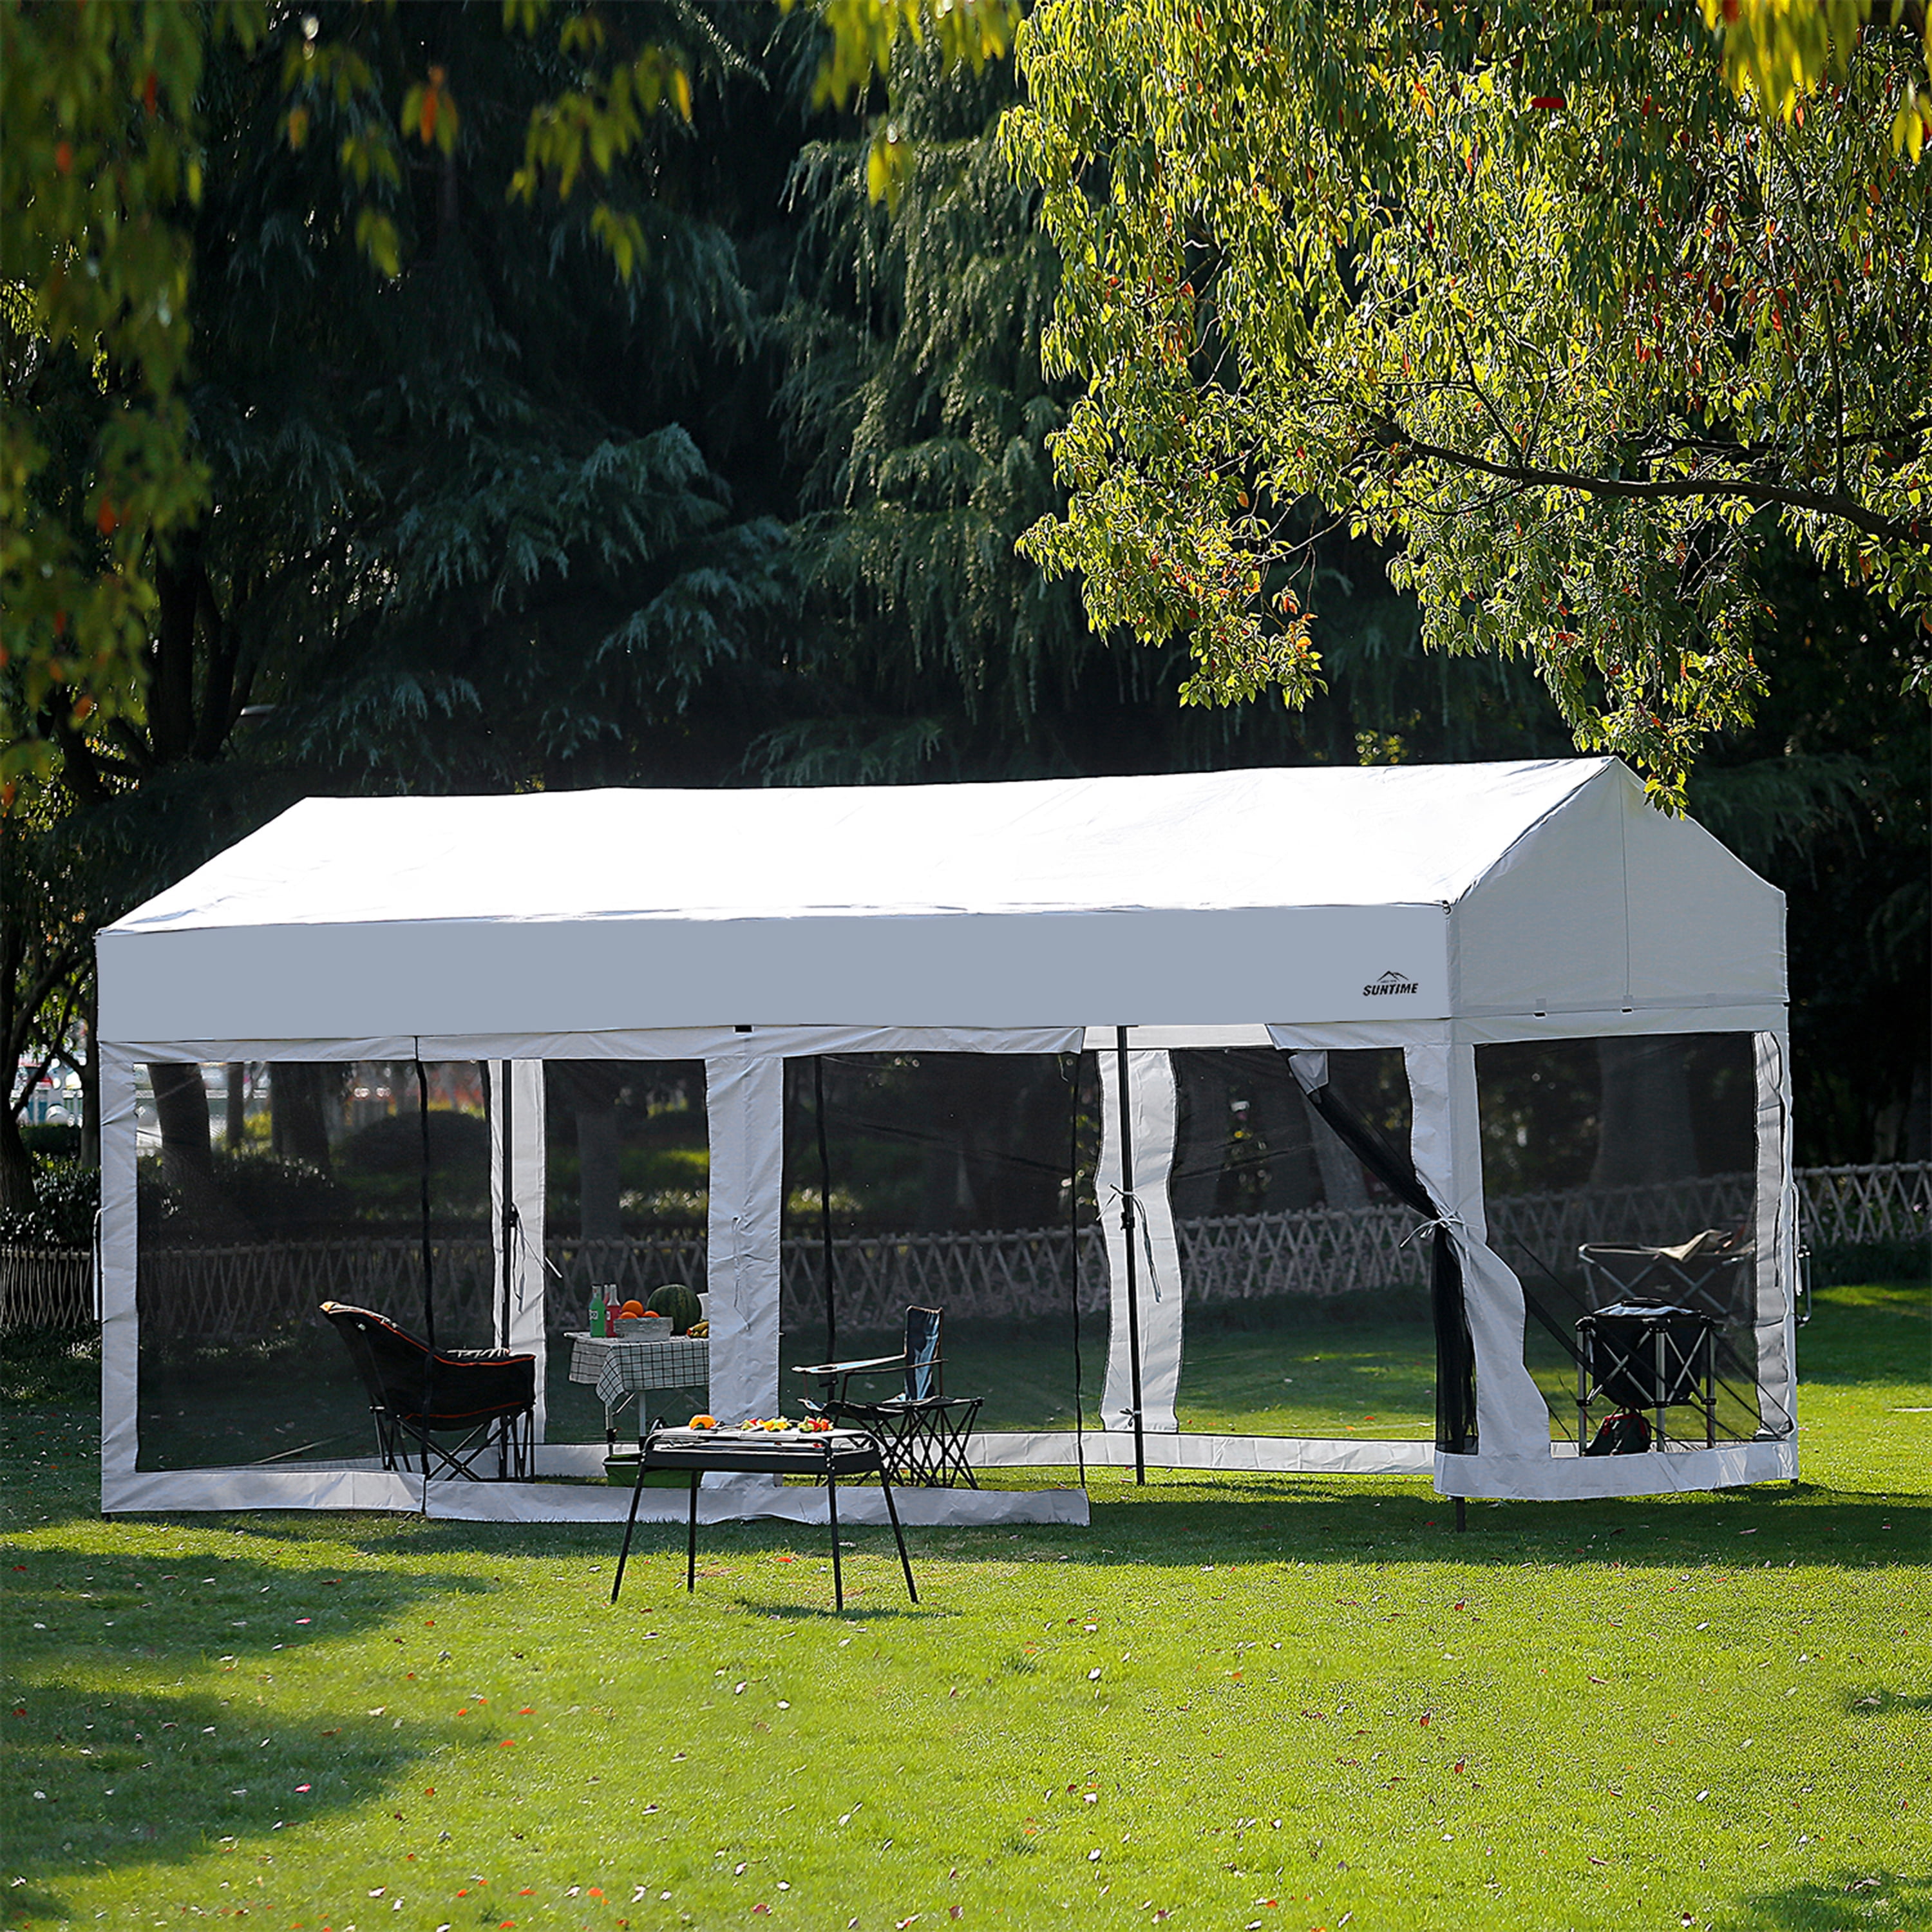 10' X 20' Easy Pop Up Canopy Party Tent Heavy Duty Garage Car Shelter ...